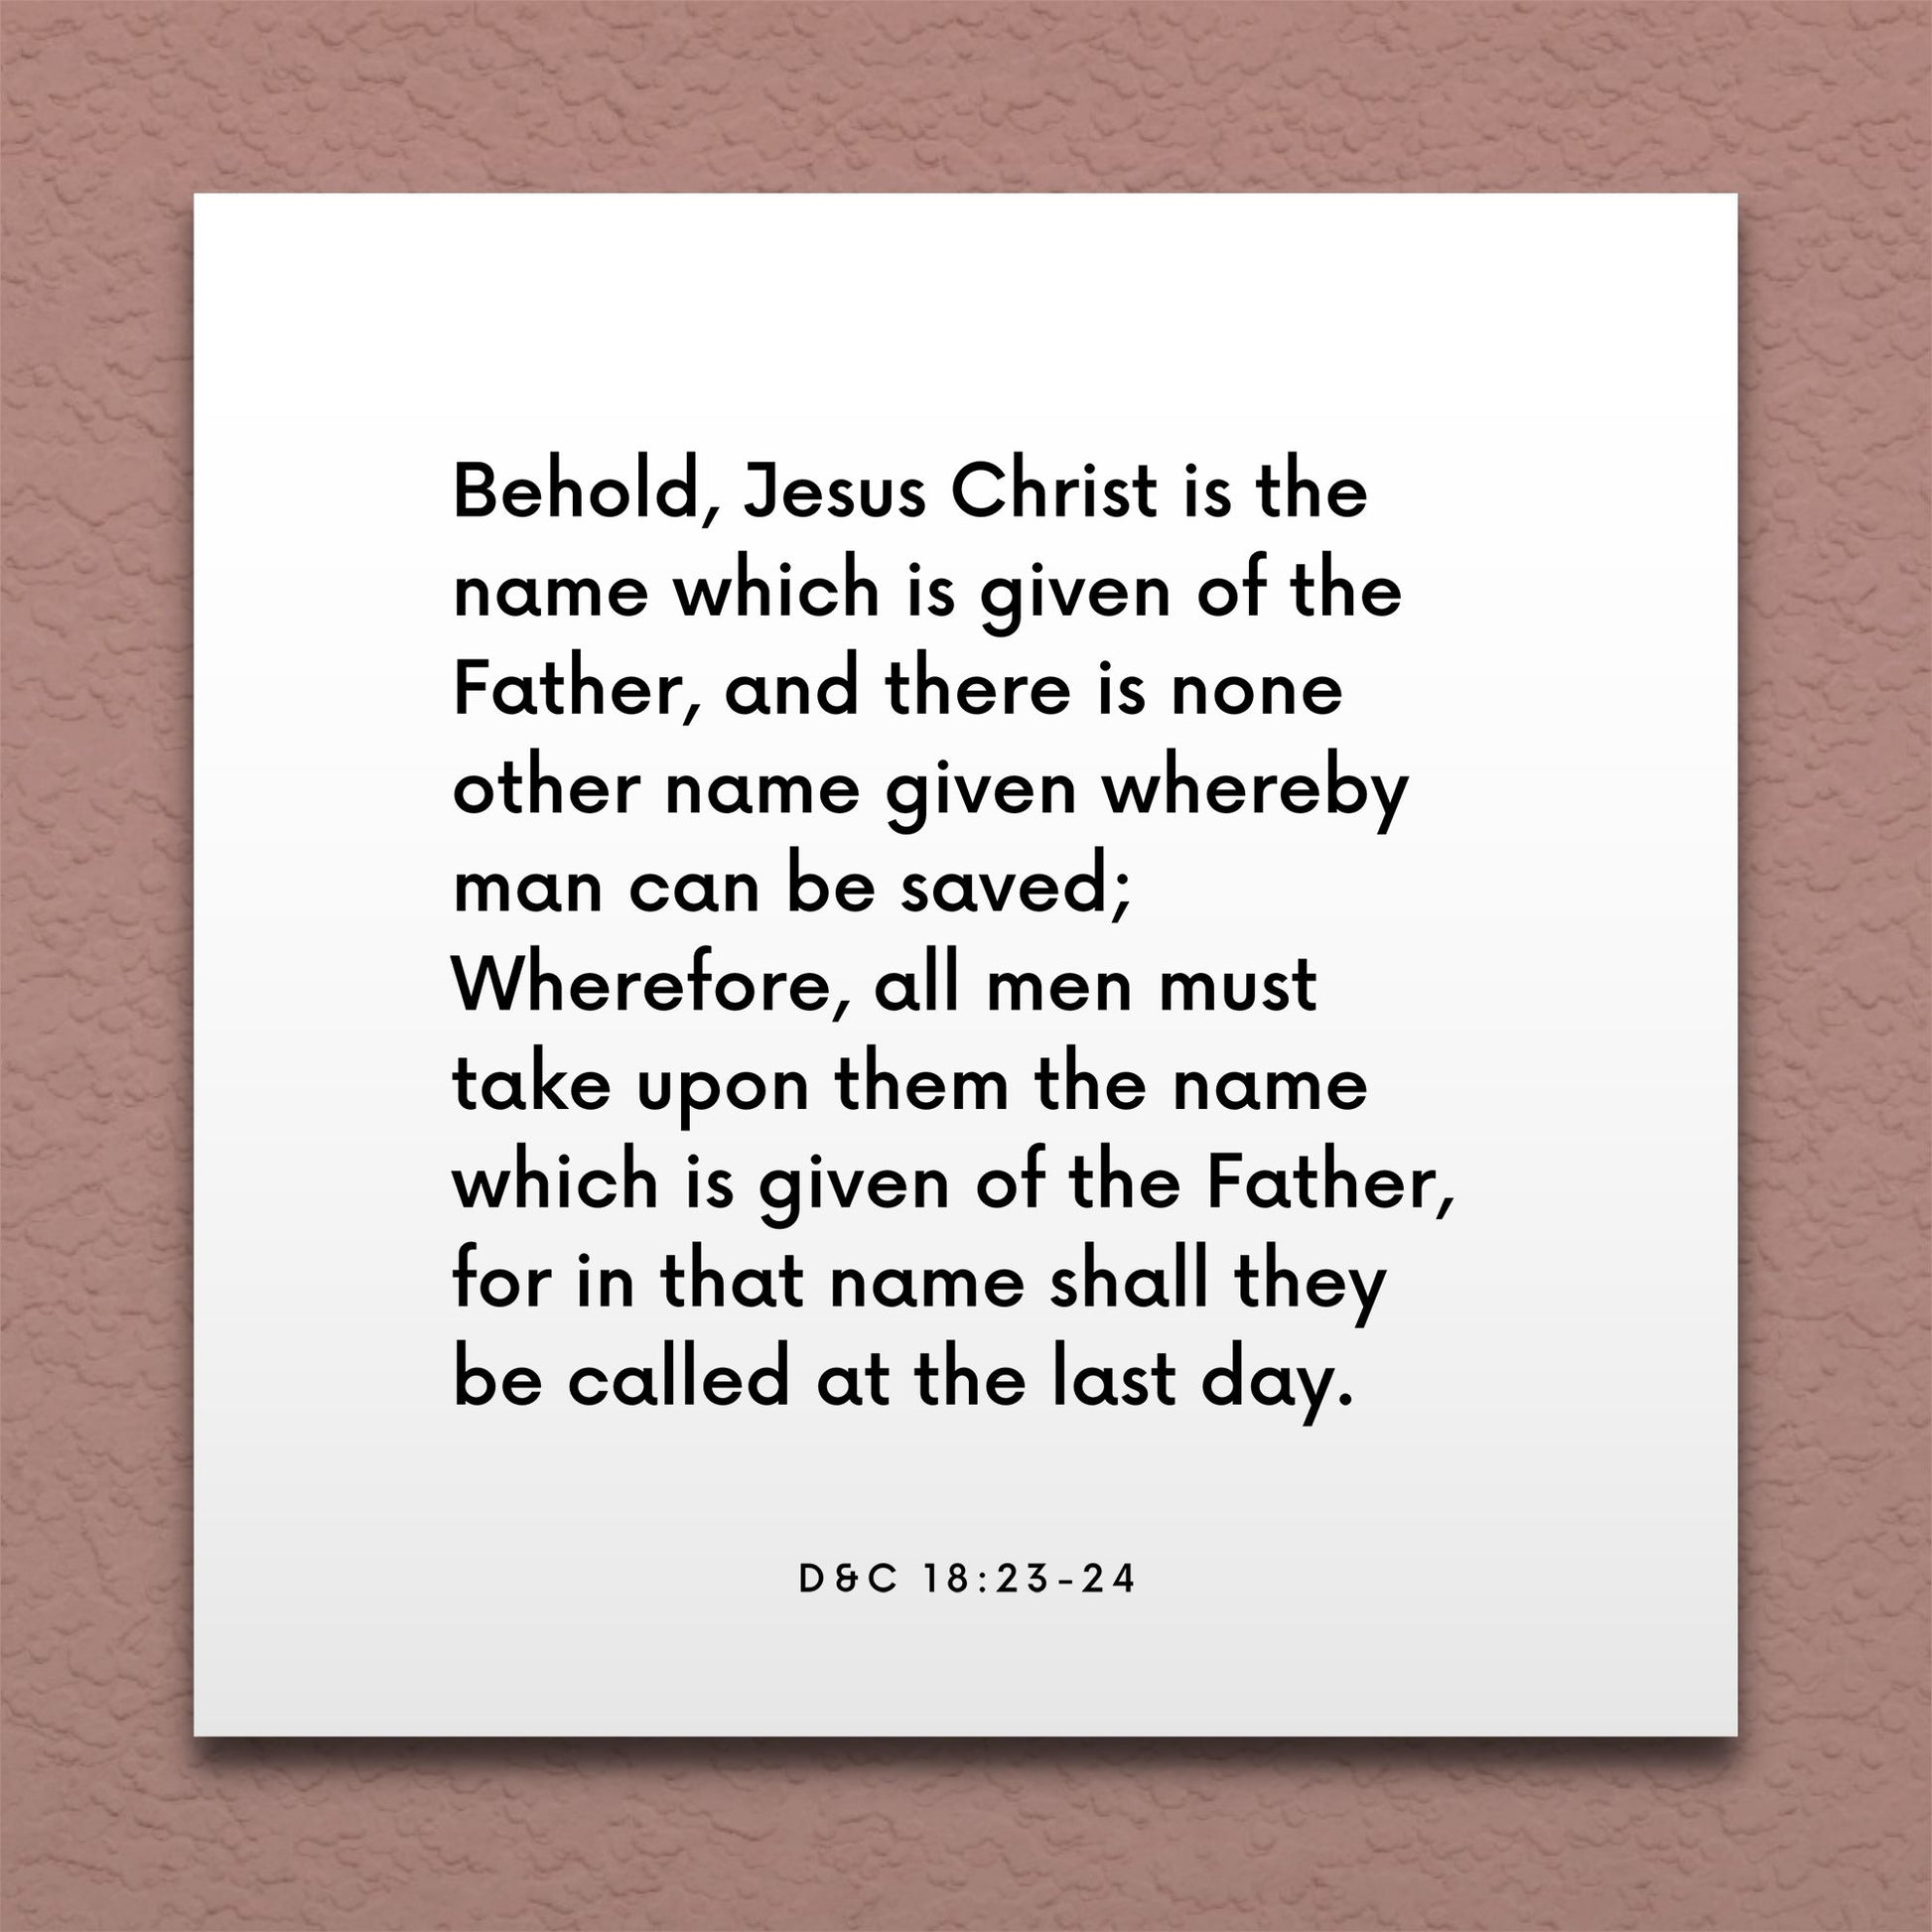 Wall-mounted scripture tile for D&C 18:23-24 - "All men must take upon them the name of Christ"